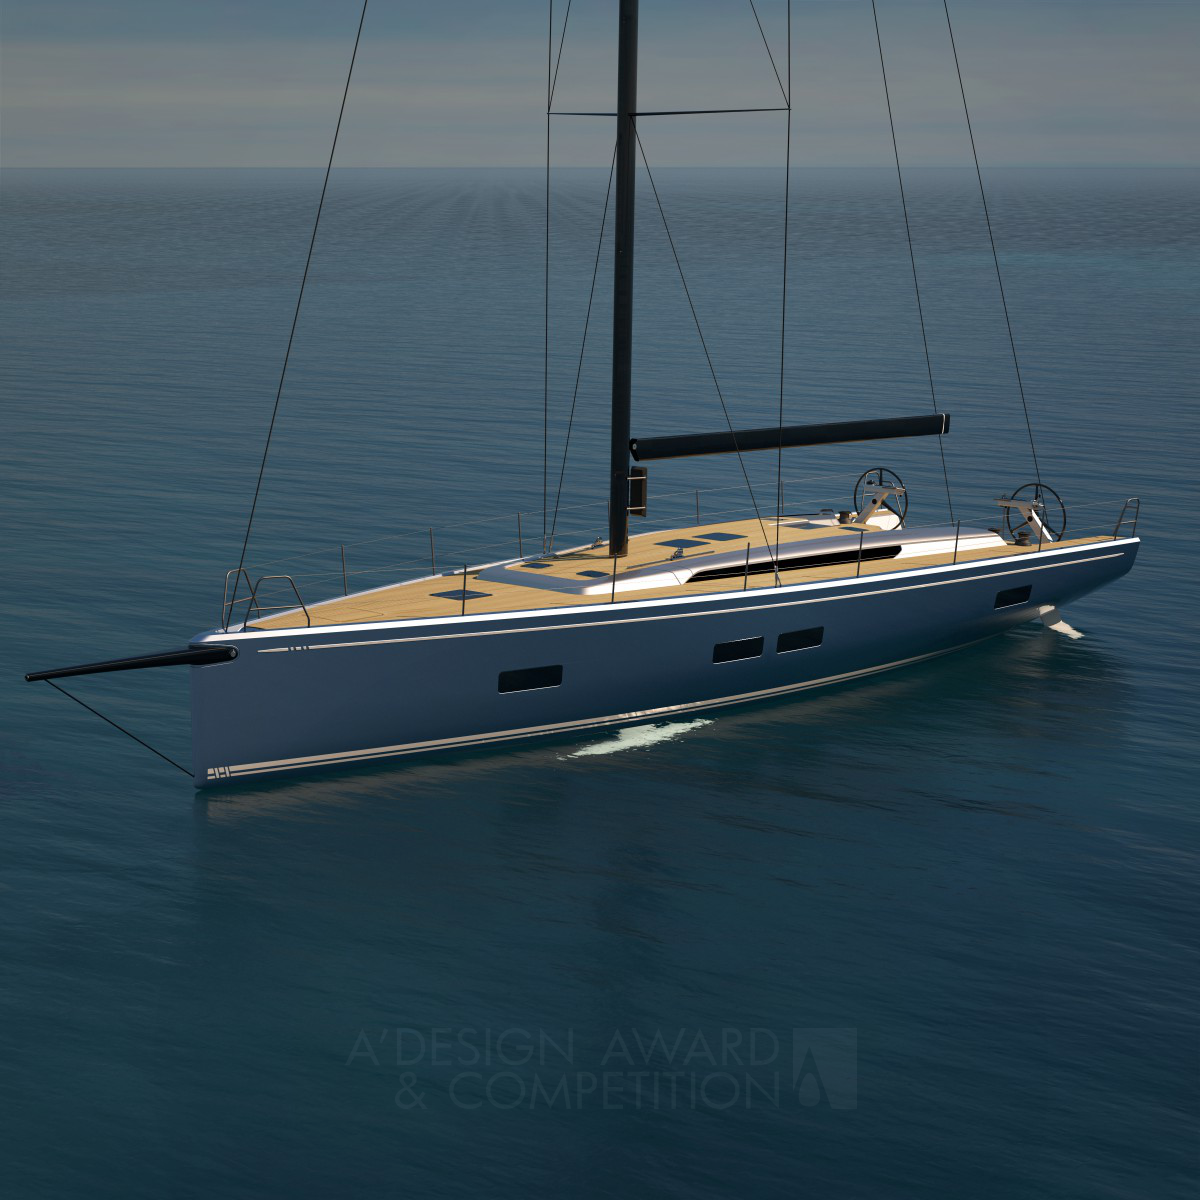 54ft Racer Cruiser High Performance Yacht by Harry Miesbauer